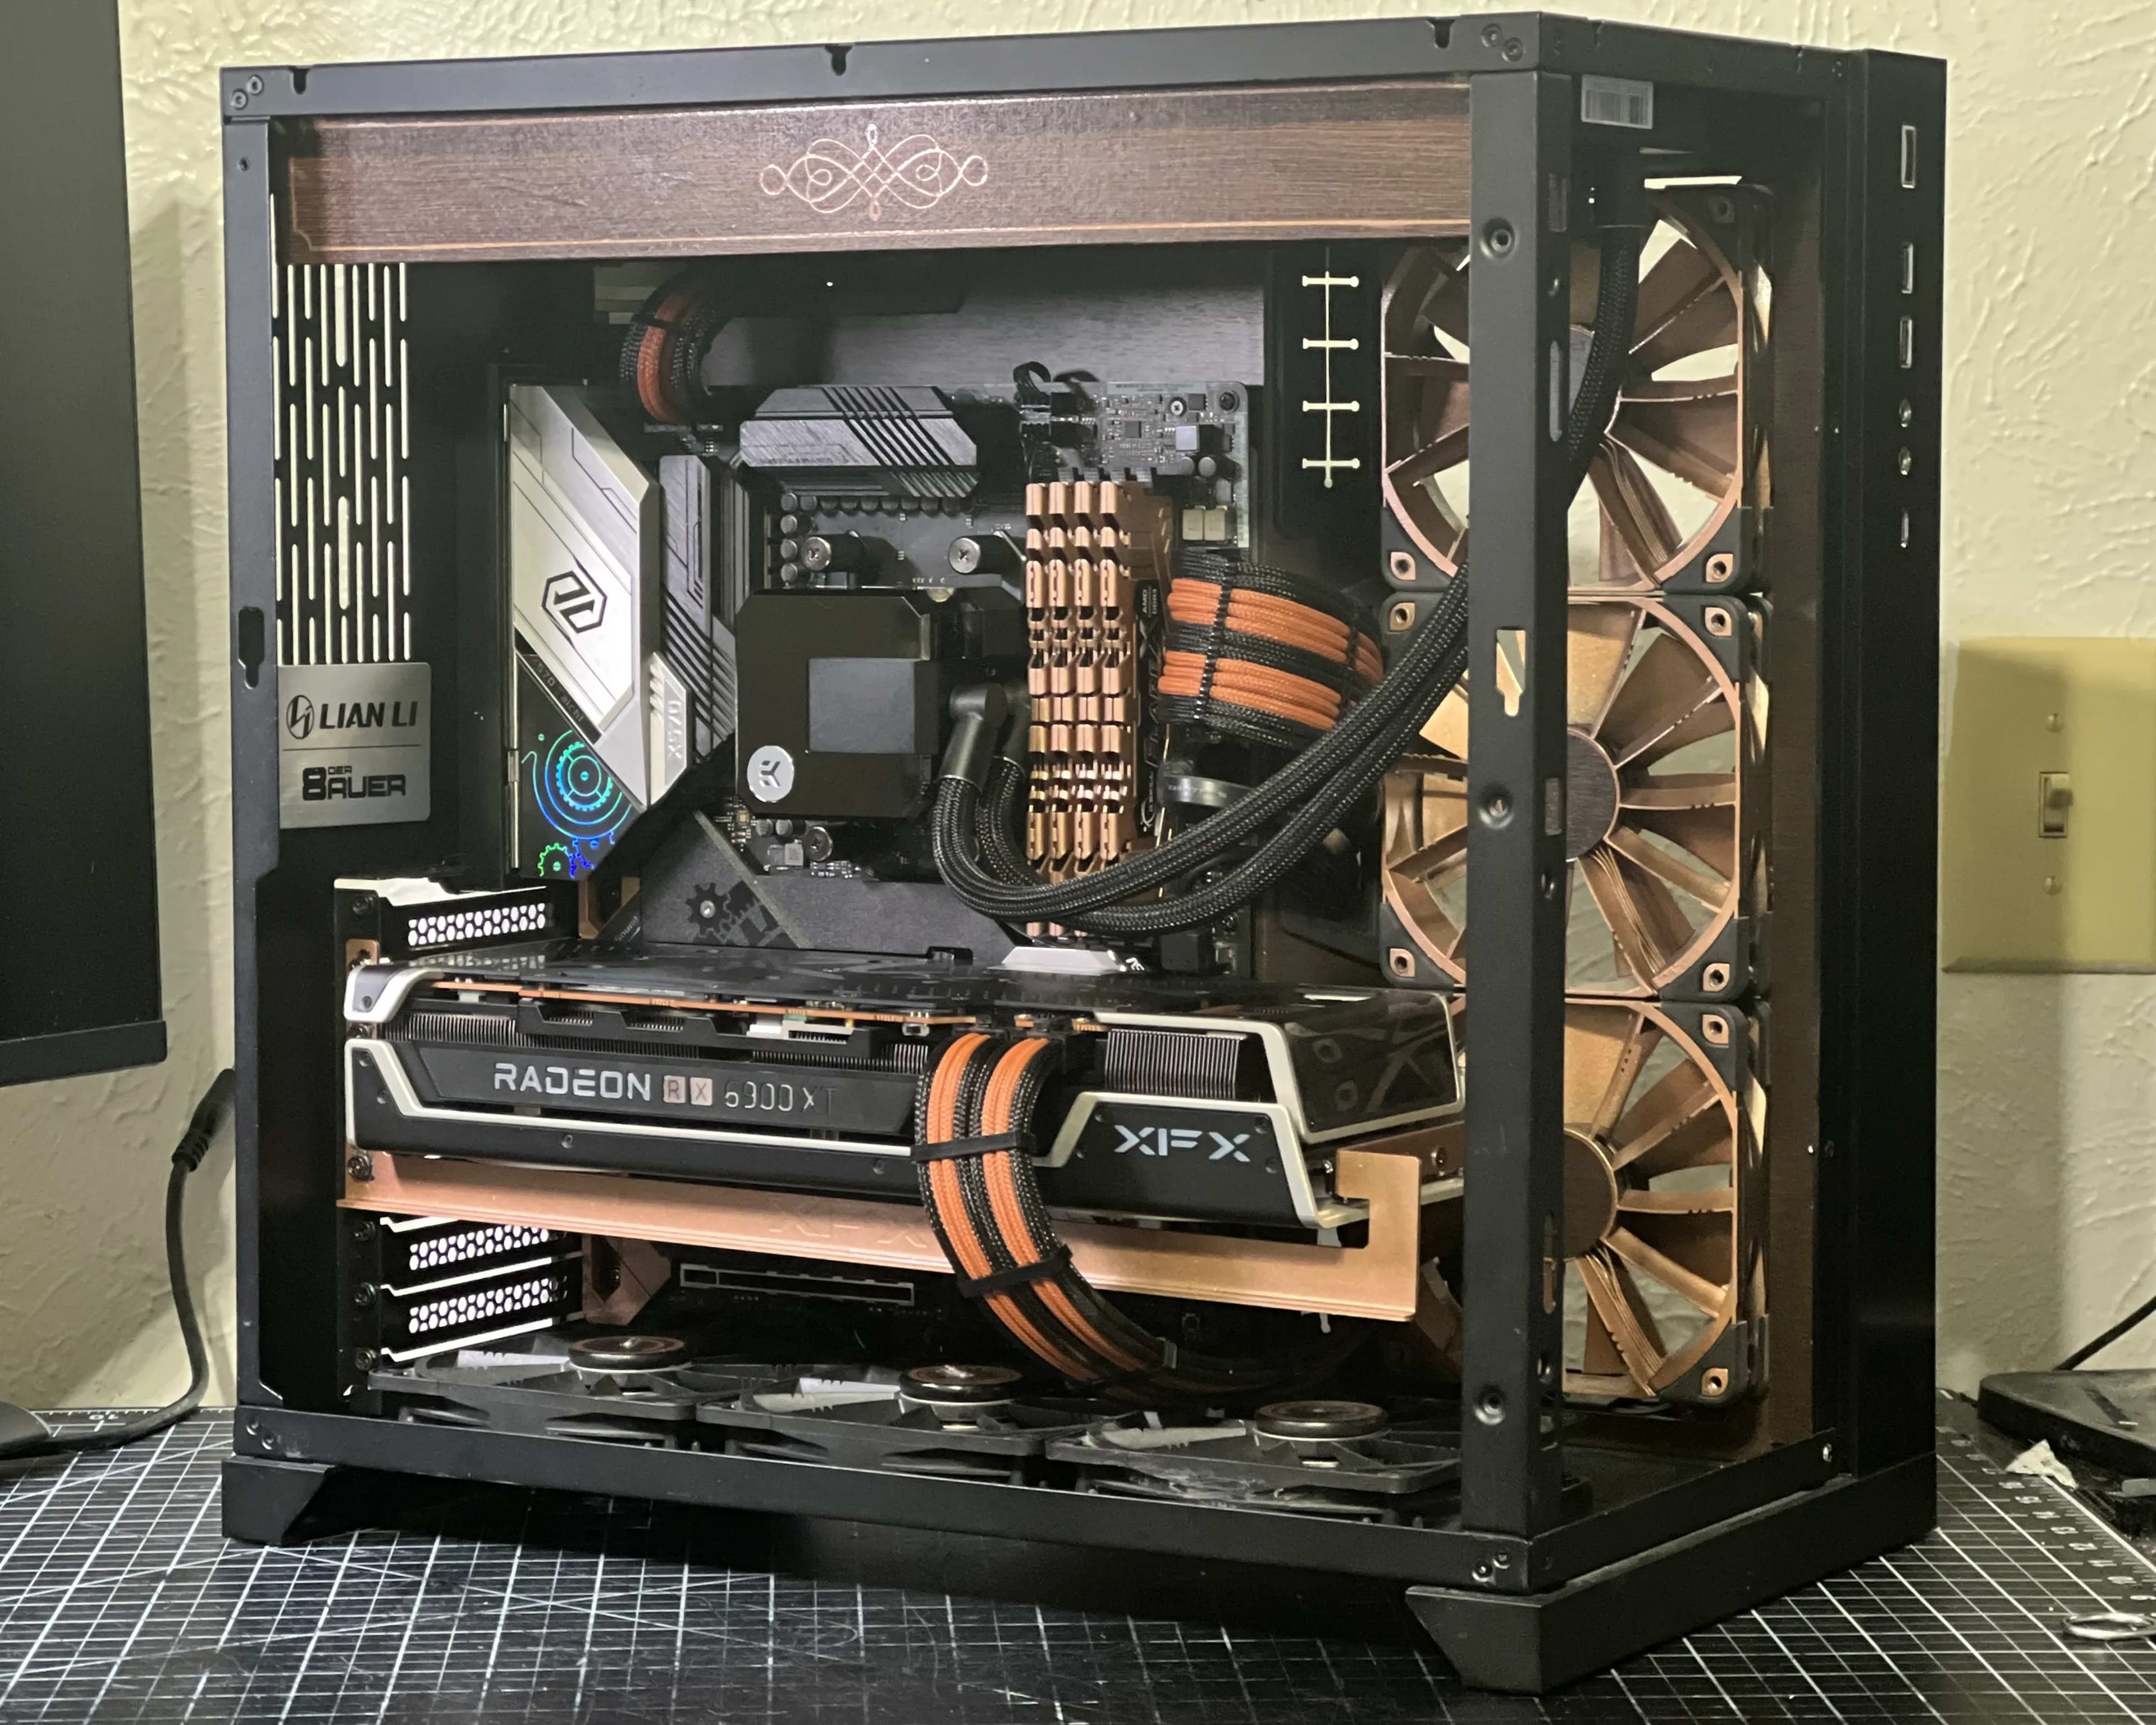 High-end gaming PC with a unique steampunk aesthetic - 5800X3D/6900 XT/32GB RAM